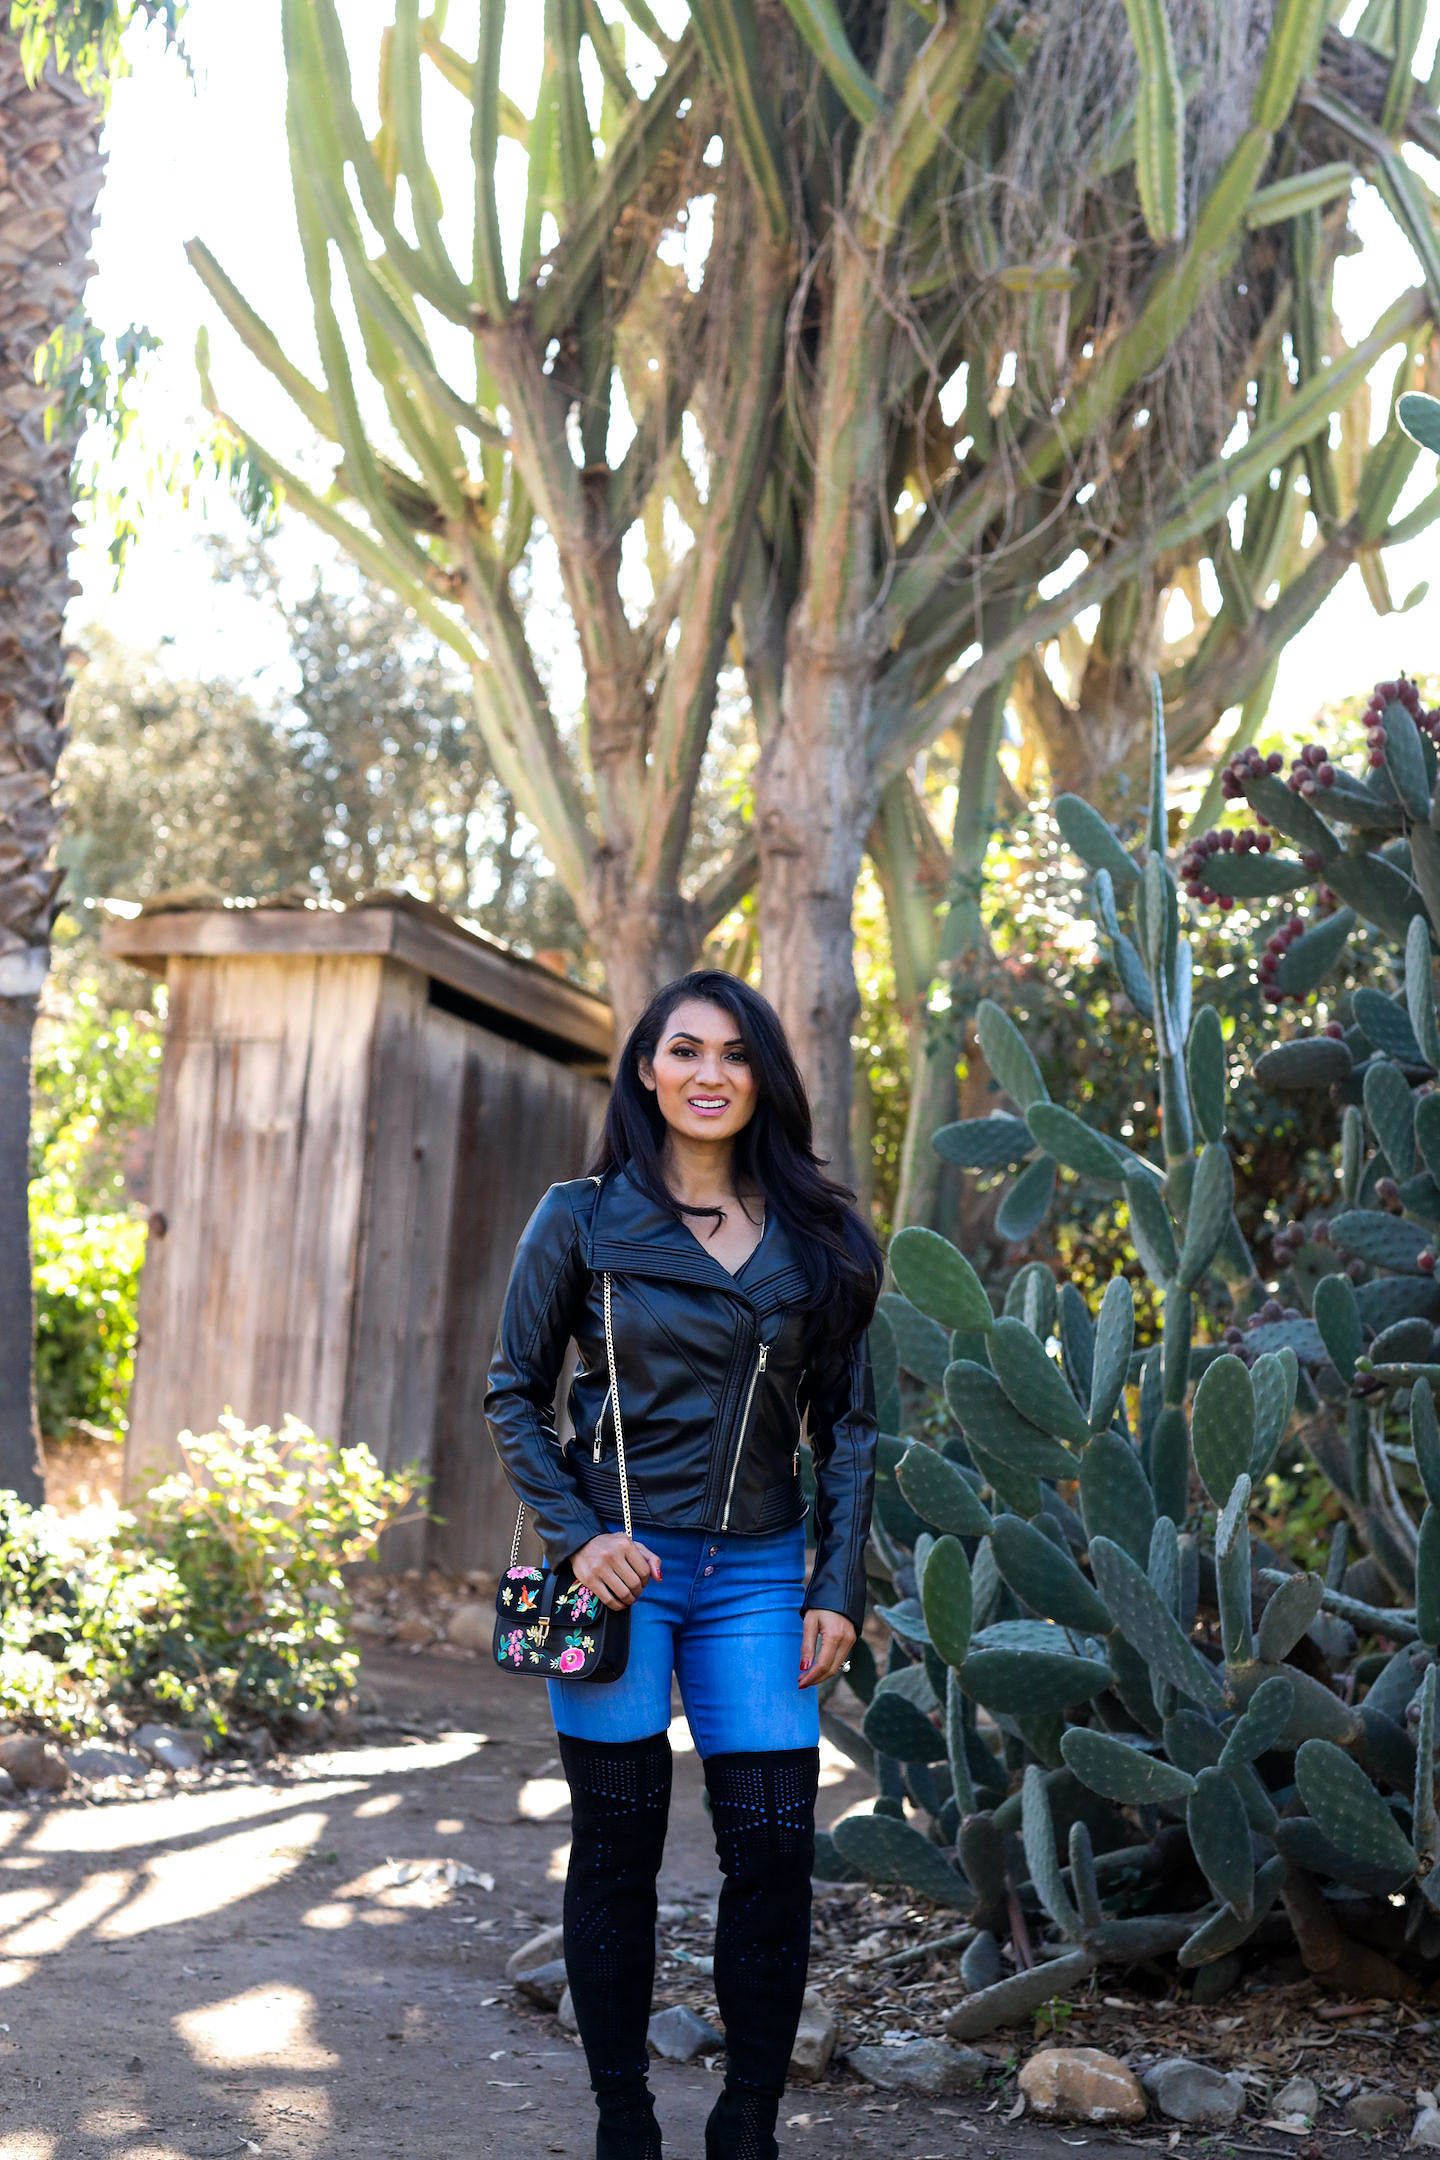 Looking for the perfect pair of Black OTK boots this season? Orange County Blogger Debbie Savage is sharing why you need to try this must have shoe staple ASAP here!